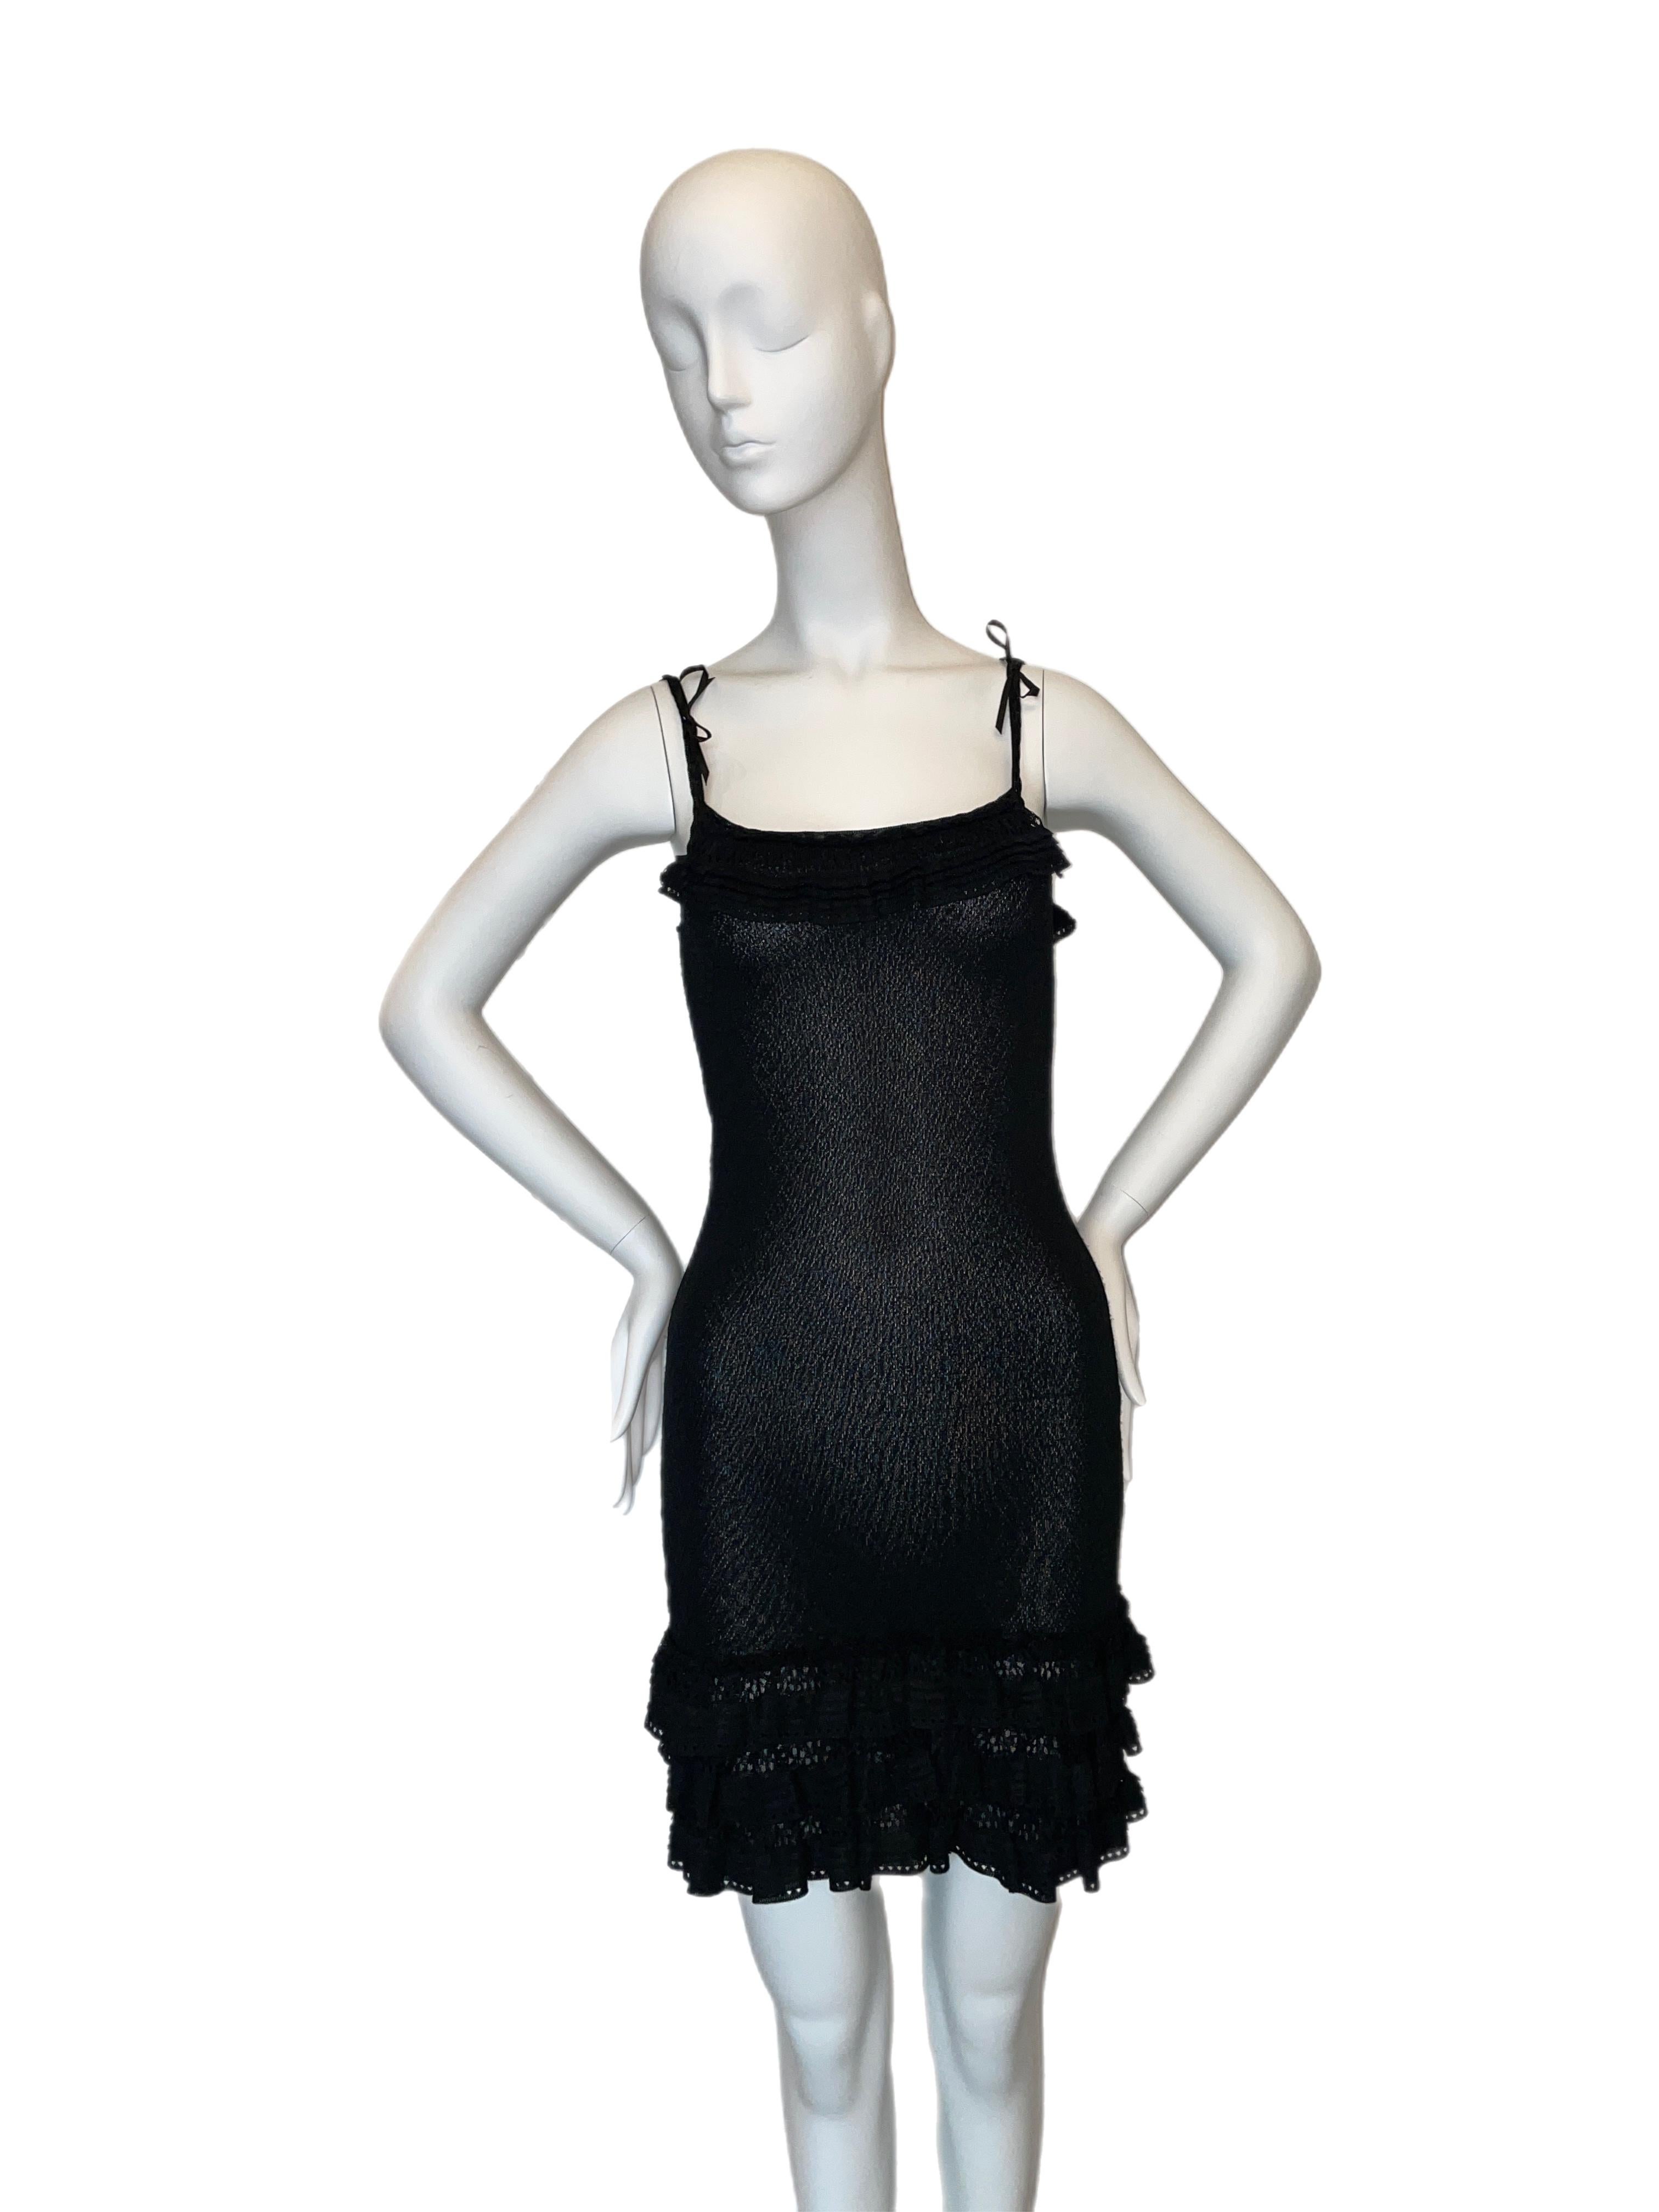 FINAL SALE NO RETURNS / REFUNDS

John Galliano for Christian Dior vintage SS06 pitch black semi-sheer dress. Excellent condition, no flaws. Size F38, fits like an XS imo. 

Measurements in inches unstretched: pit to pit 13.5, rib area 12, waist 13,